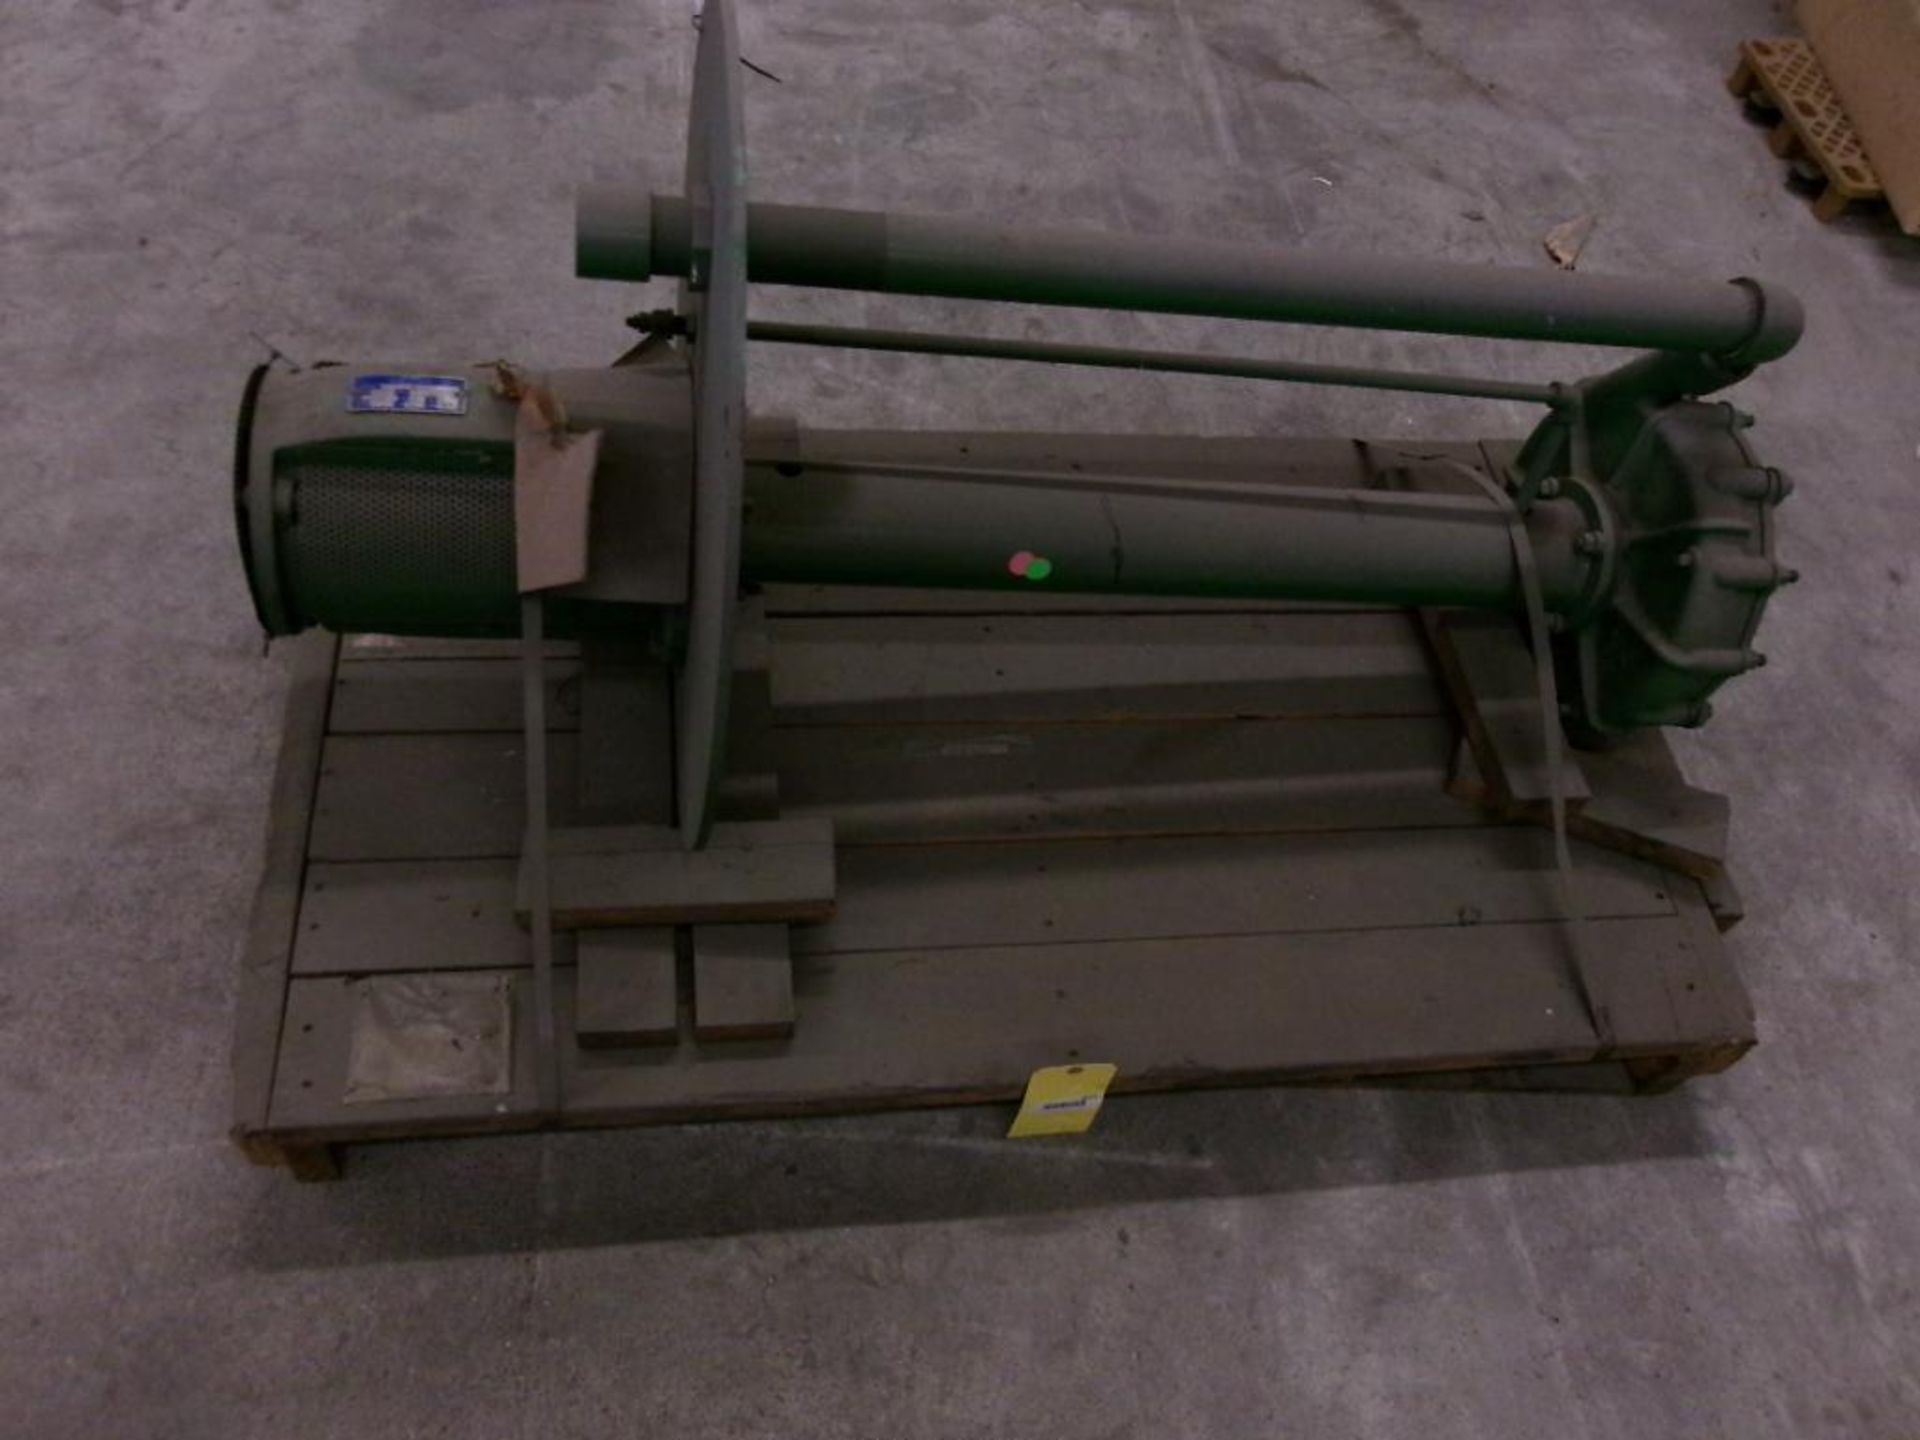 Crane Deming Shallow Well Pump, Model 4521-121686, Size: 1-1/2", 80GPM